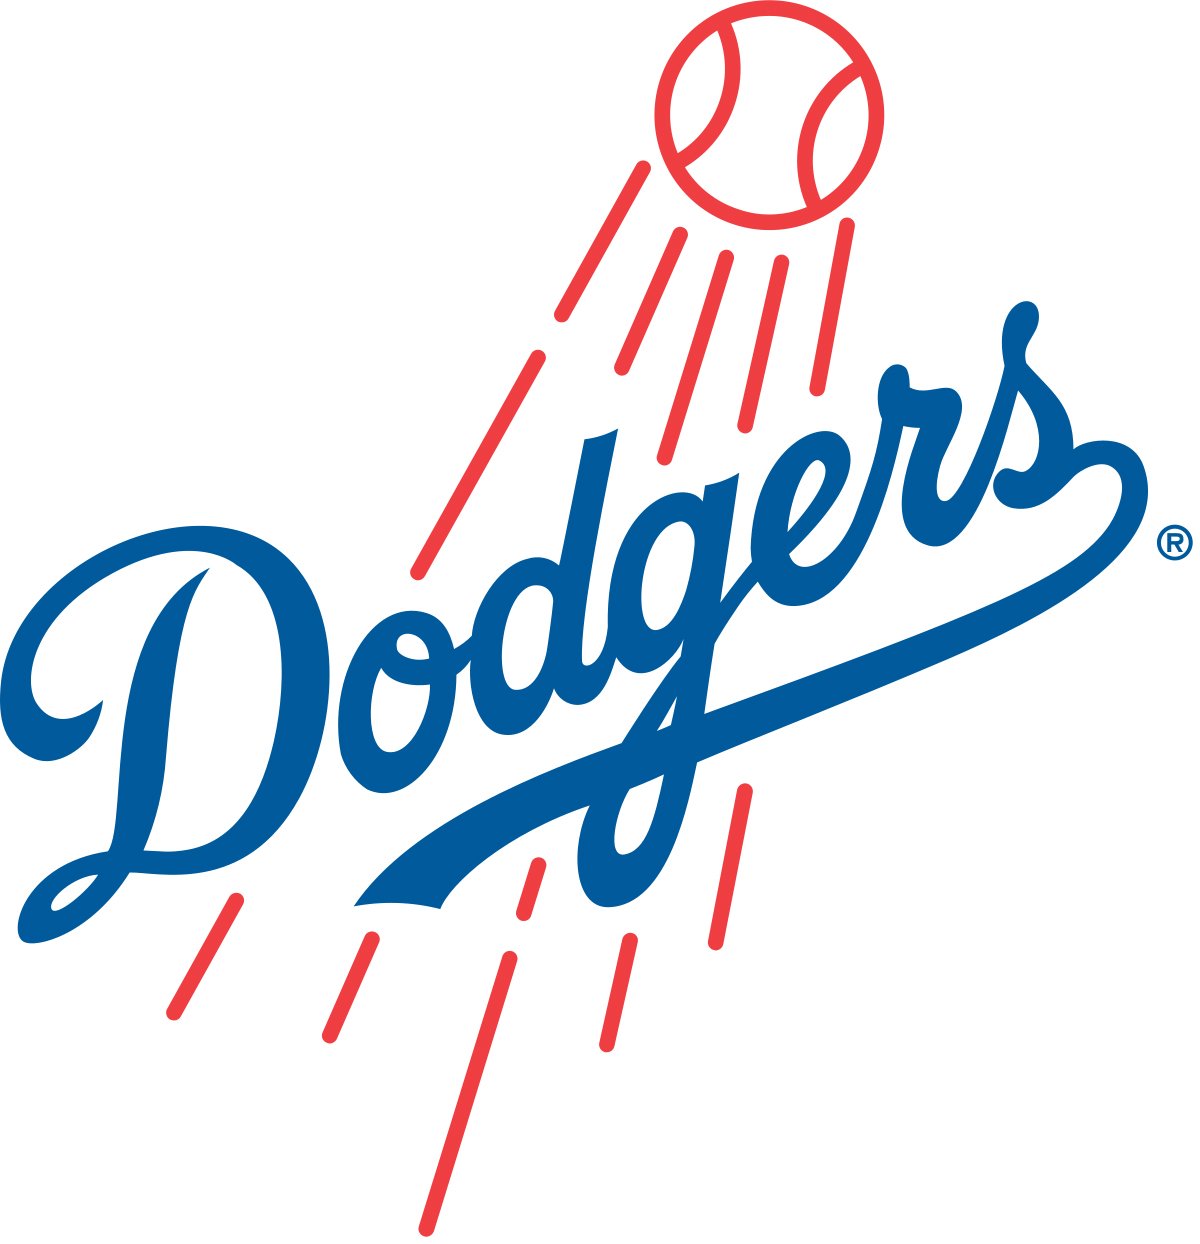 Los Angeles Dodgers Color Codes Hex, RGB, and CMYK - Team Color Codes